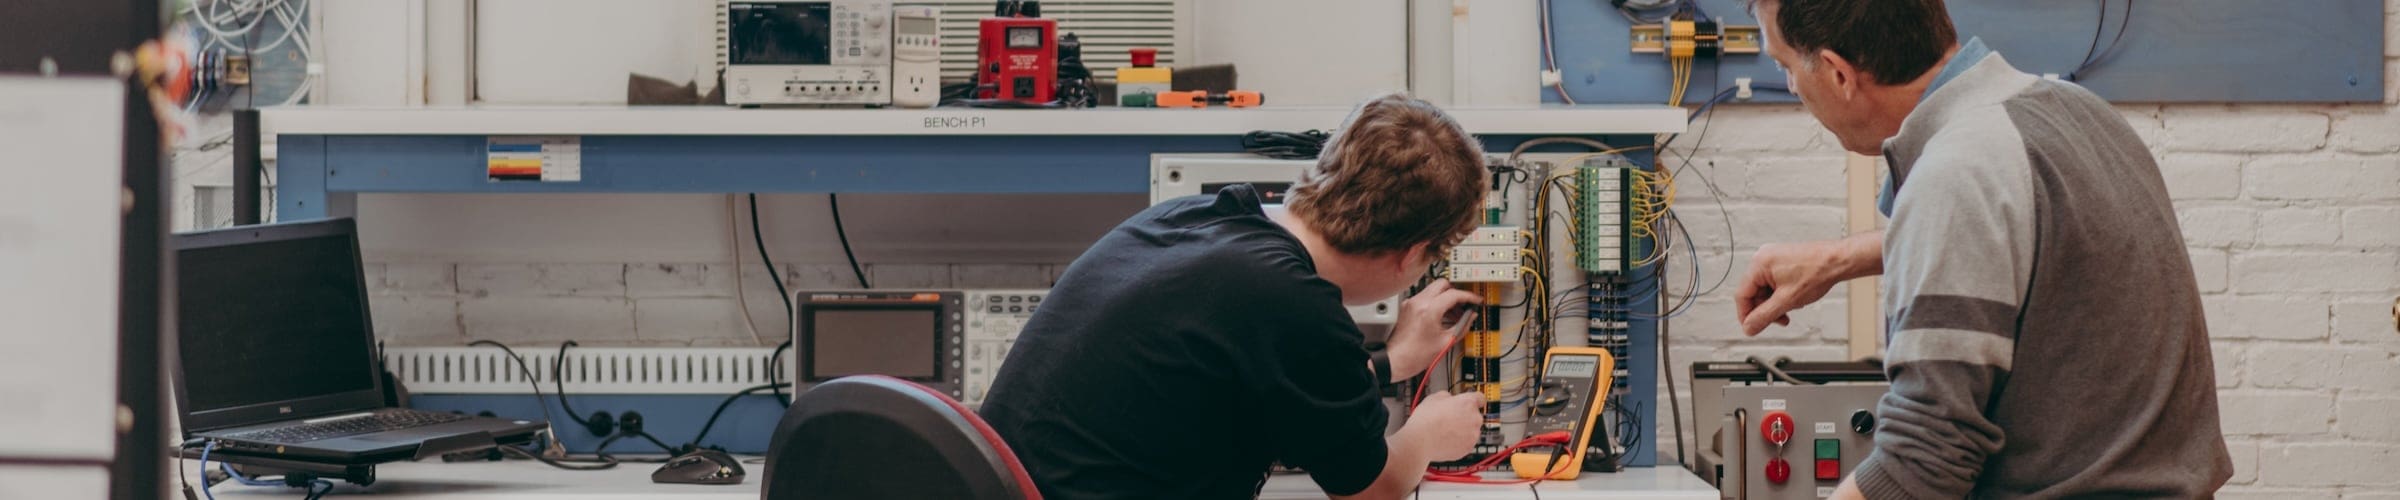 An instructor and student in the electronic engineering technology program work on a project